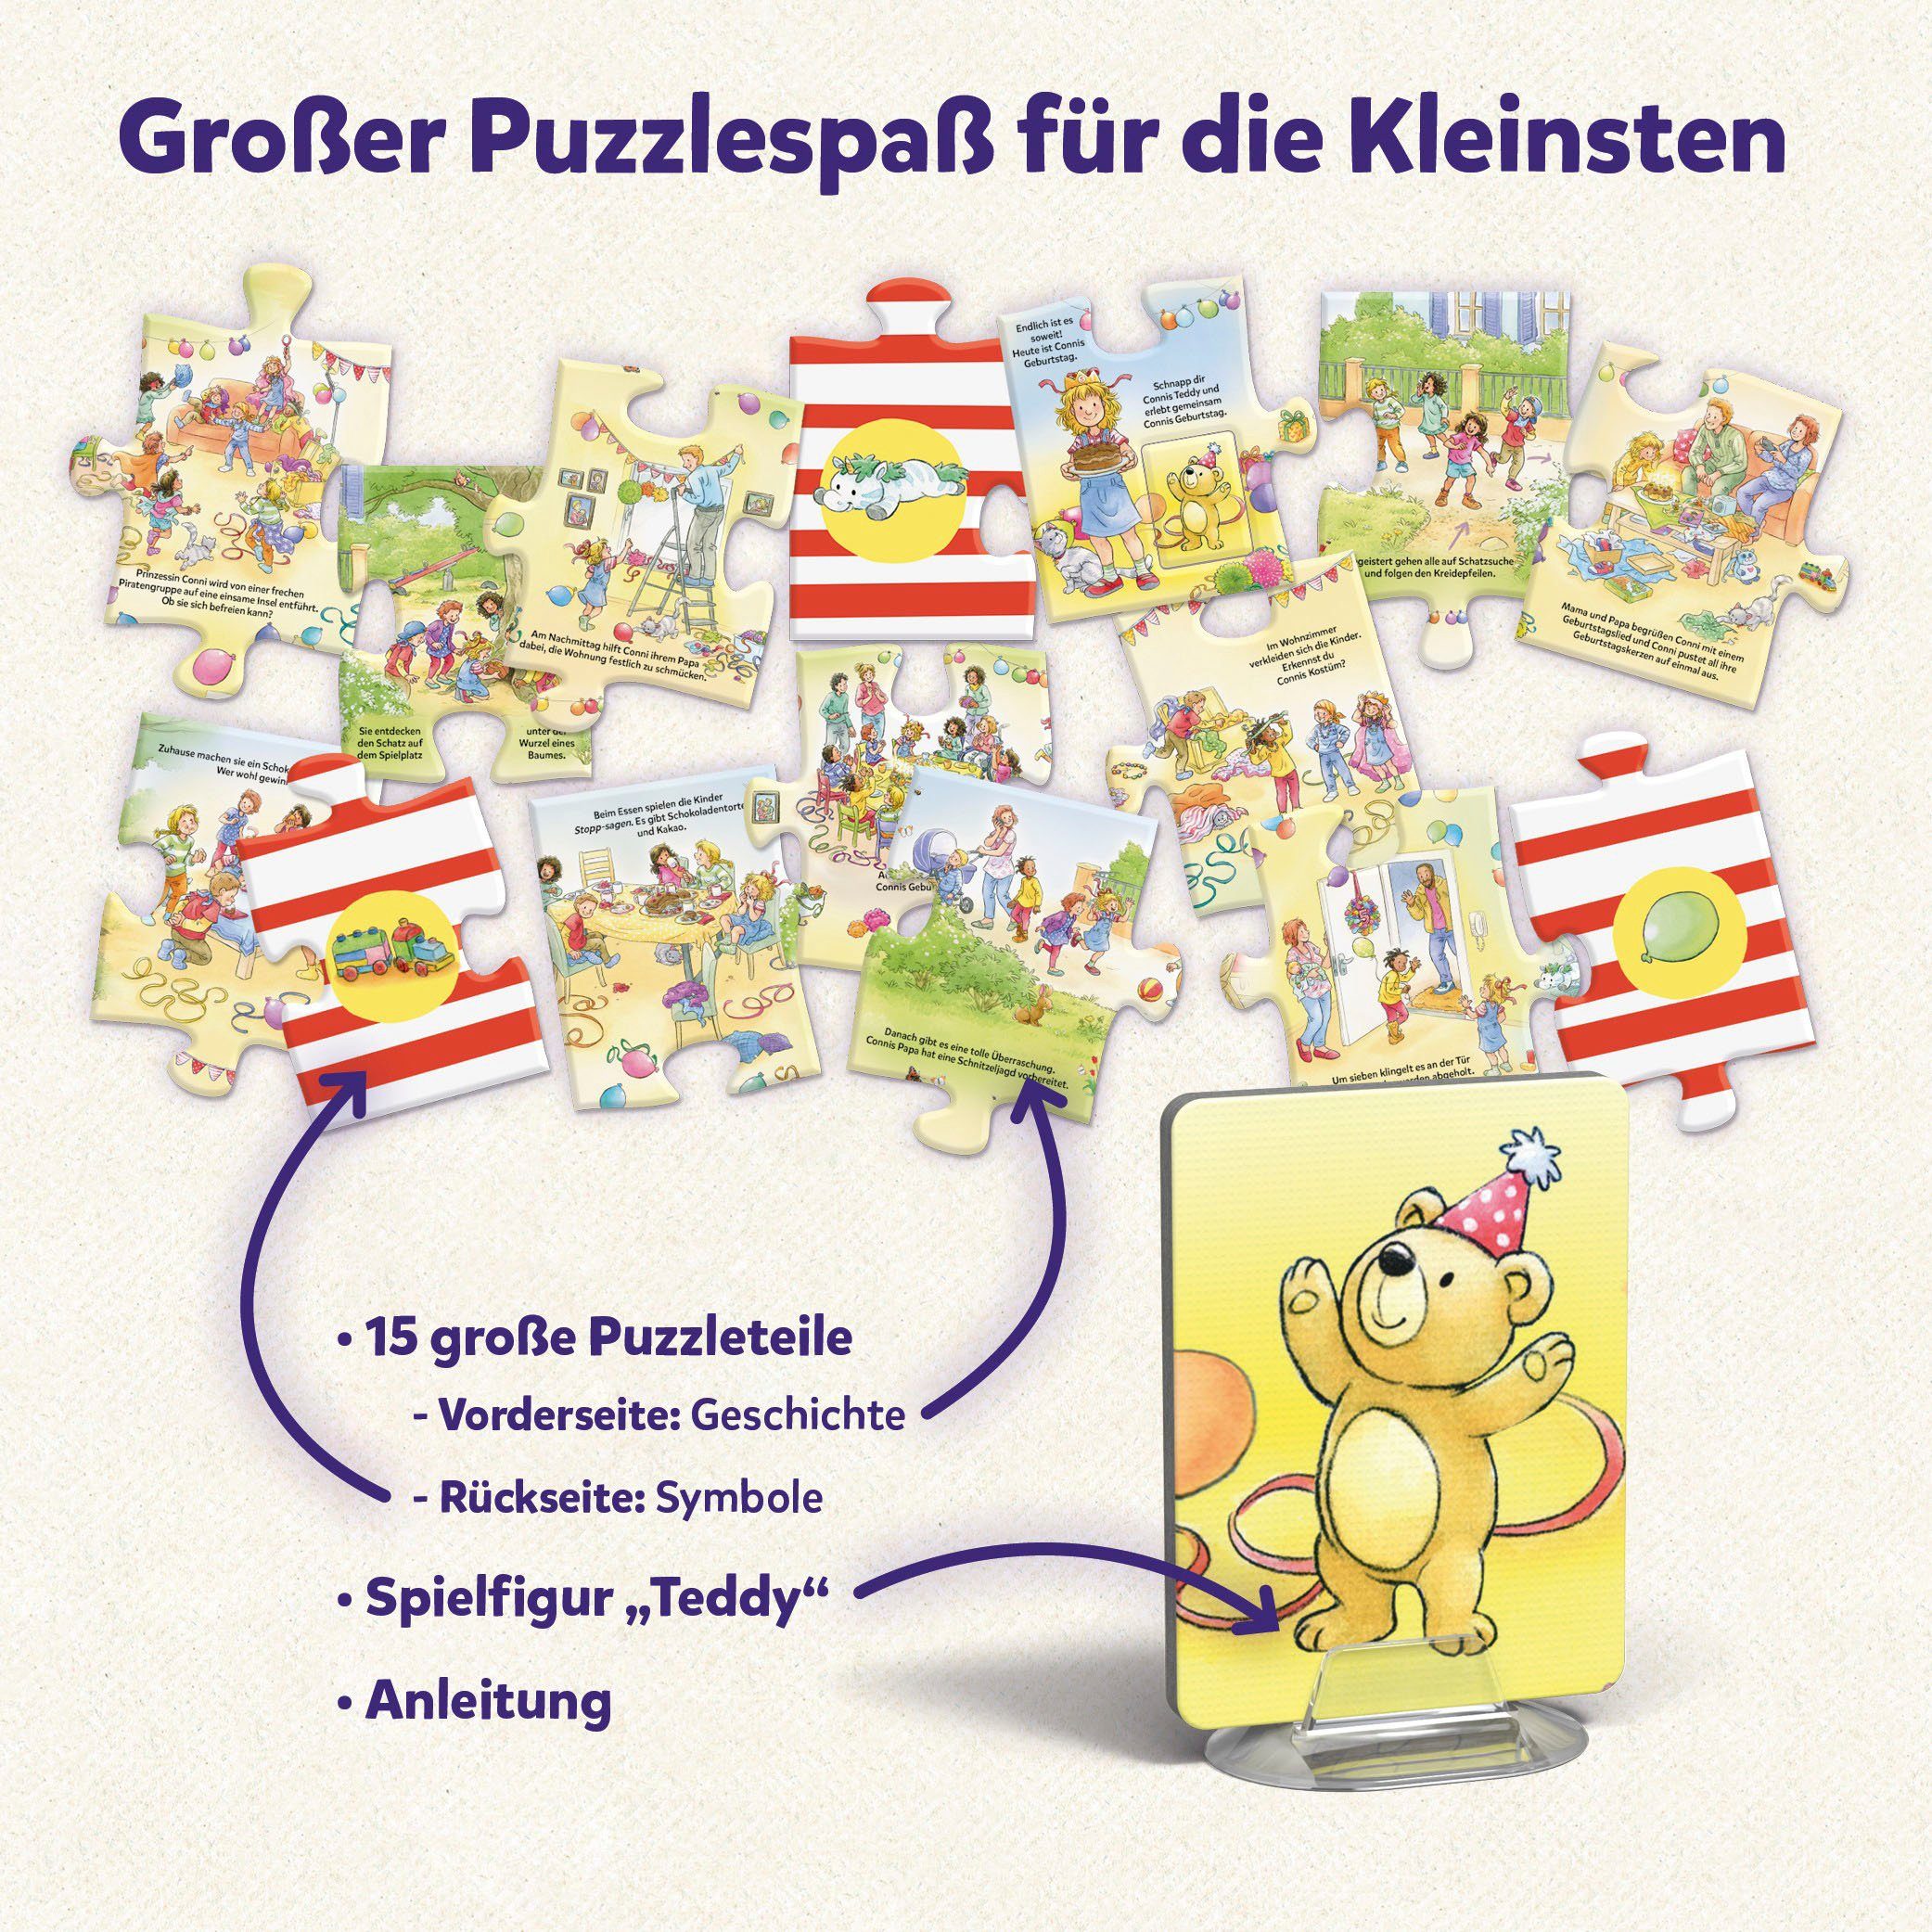 Kosmos Puzzle Mein Germany Story-Puzzle Made hat Puzzleteile, in erstes - 15 Conni Geburtstag